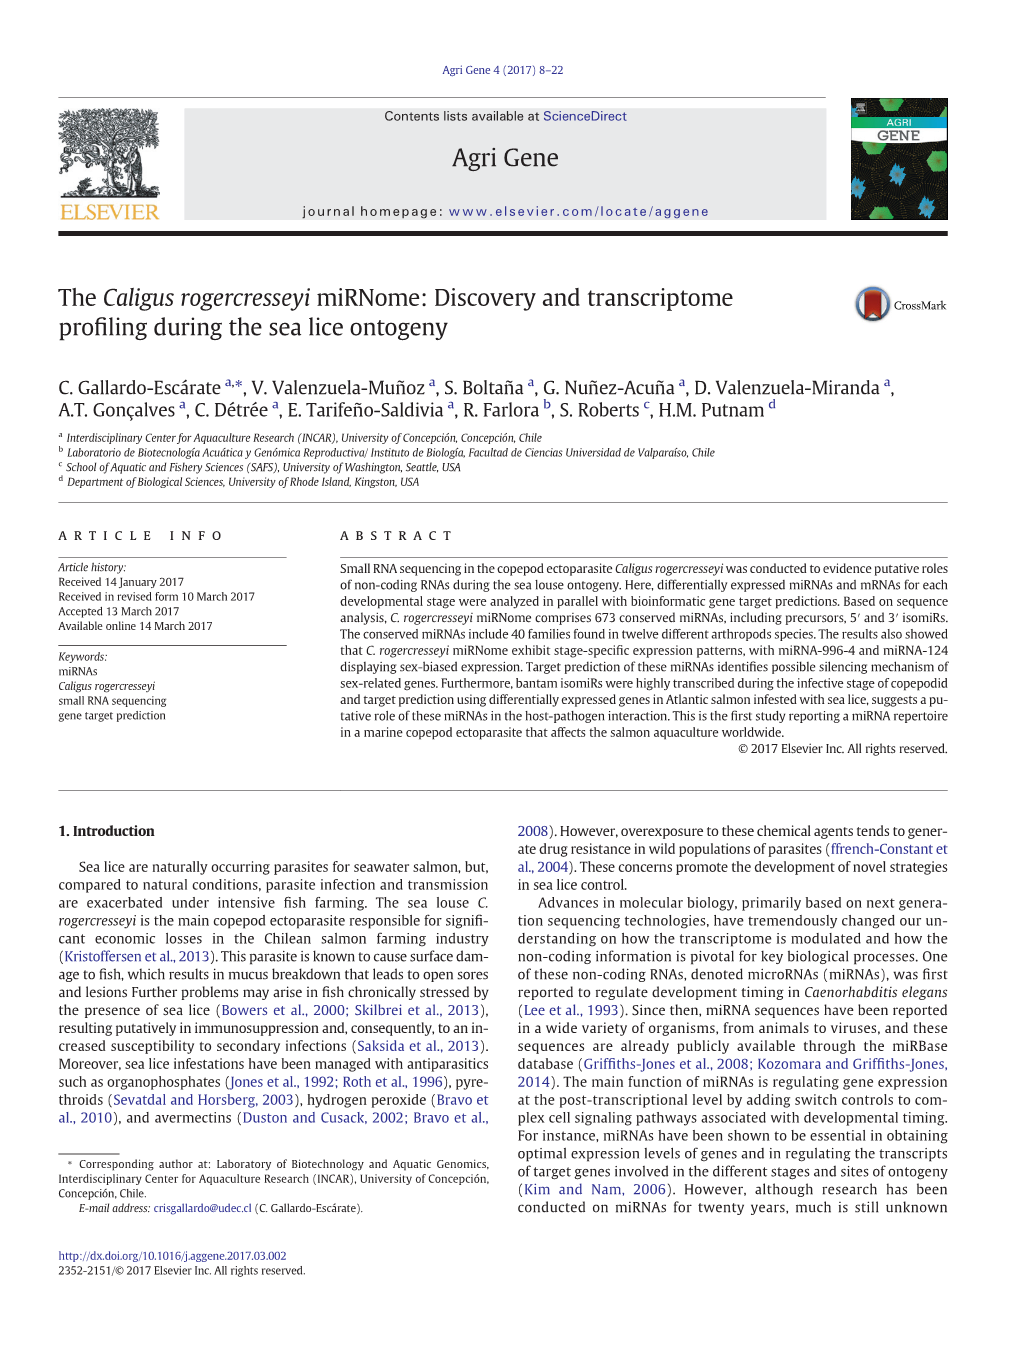 The Caligus Rogercresseyi Mirnome: Discovery and Transcriptome Proﬁling During the Sea Lice Ontogeny